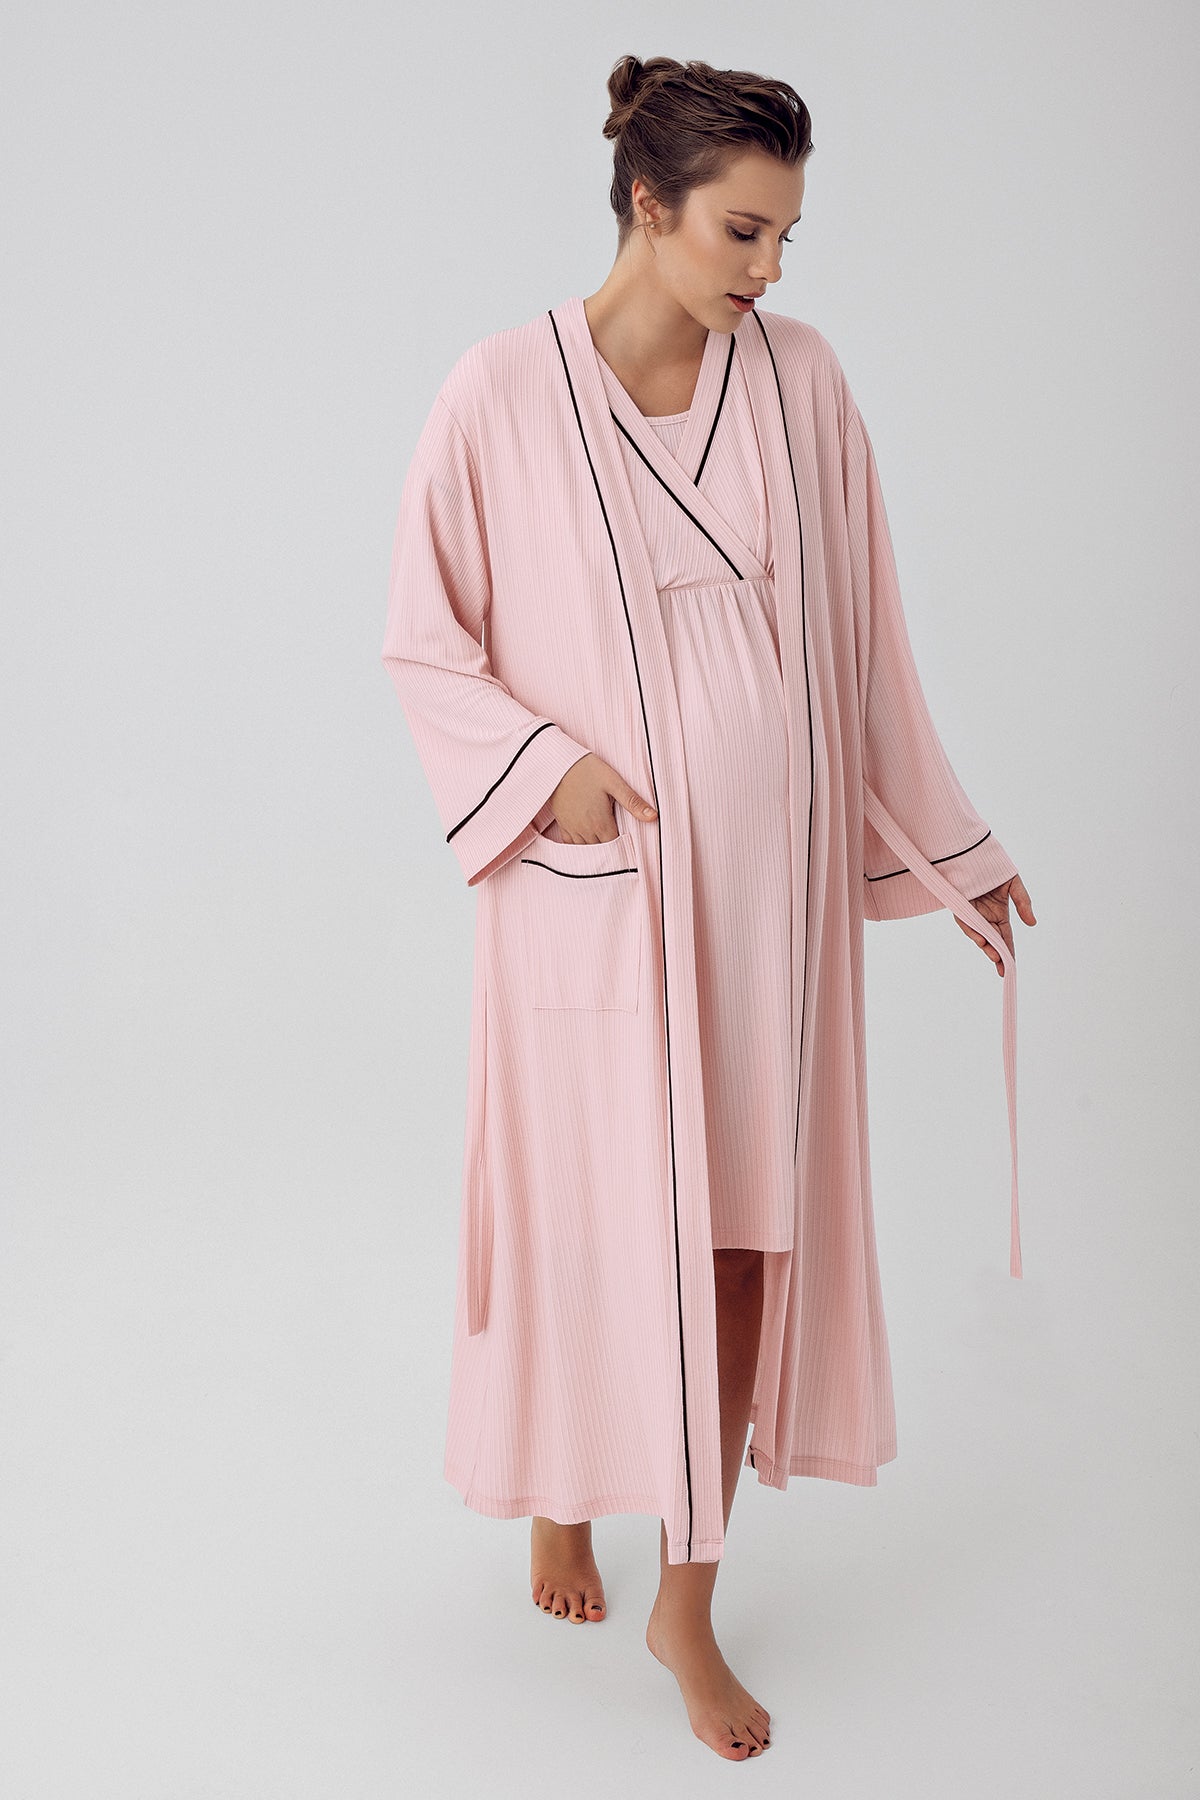 Shopymommy 16402 Double Breasted Maternity & Nursing Nightgown With Robe Pink